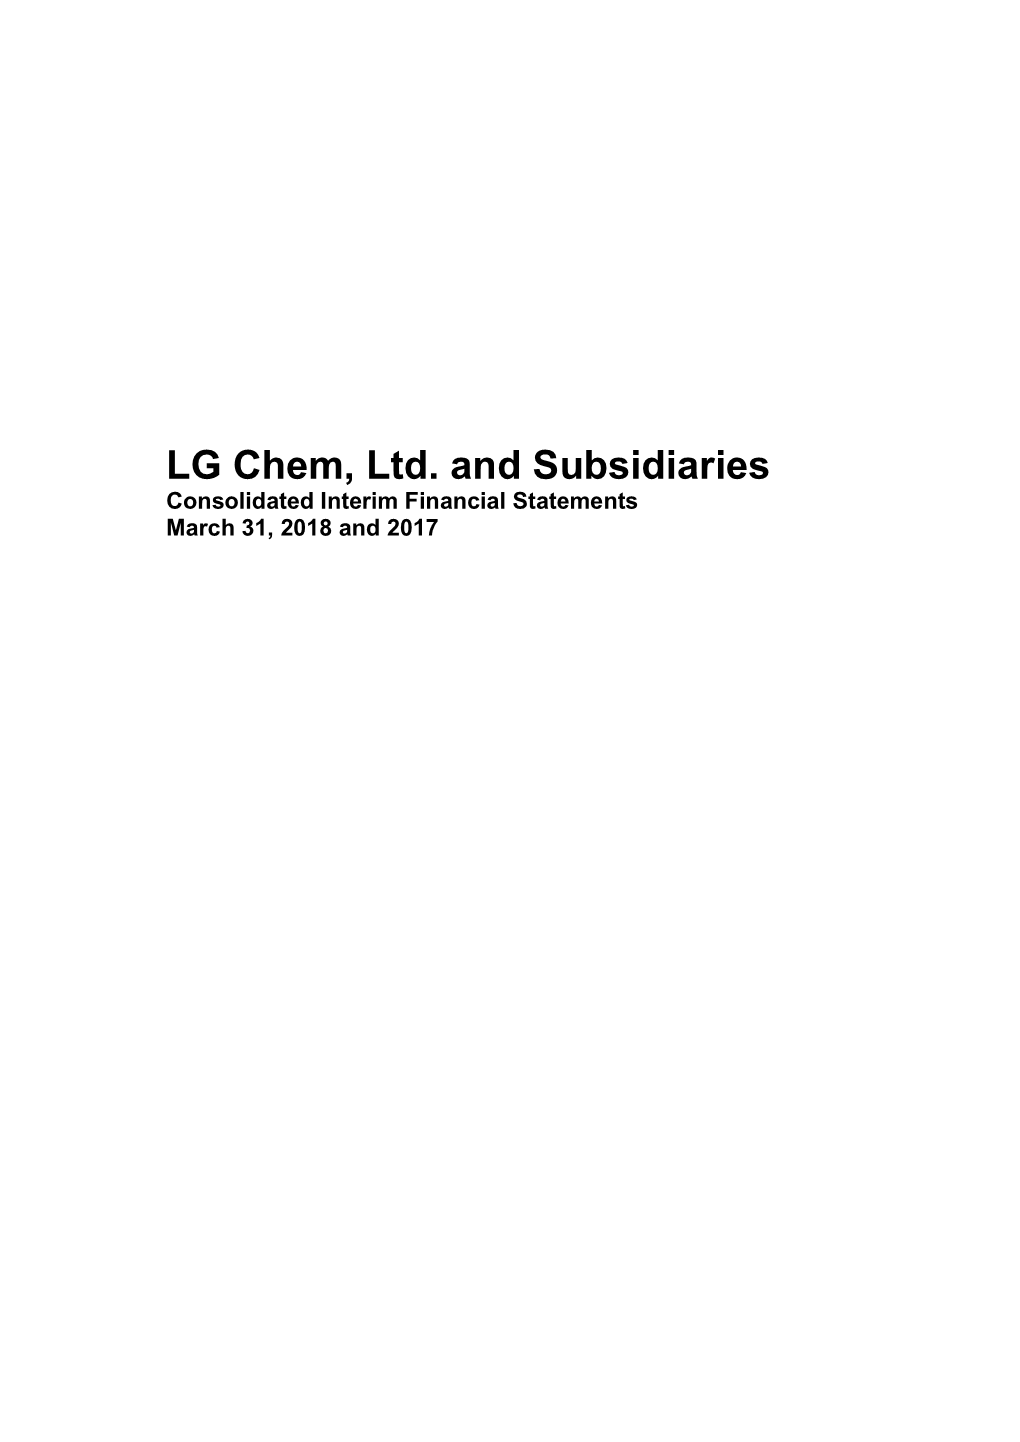 LG Chem, Ltd. and Subsidiaries Consolidated Interim Financial Statements March 31, 2018 and 2017